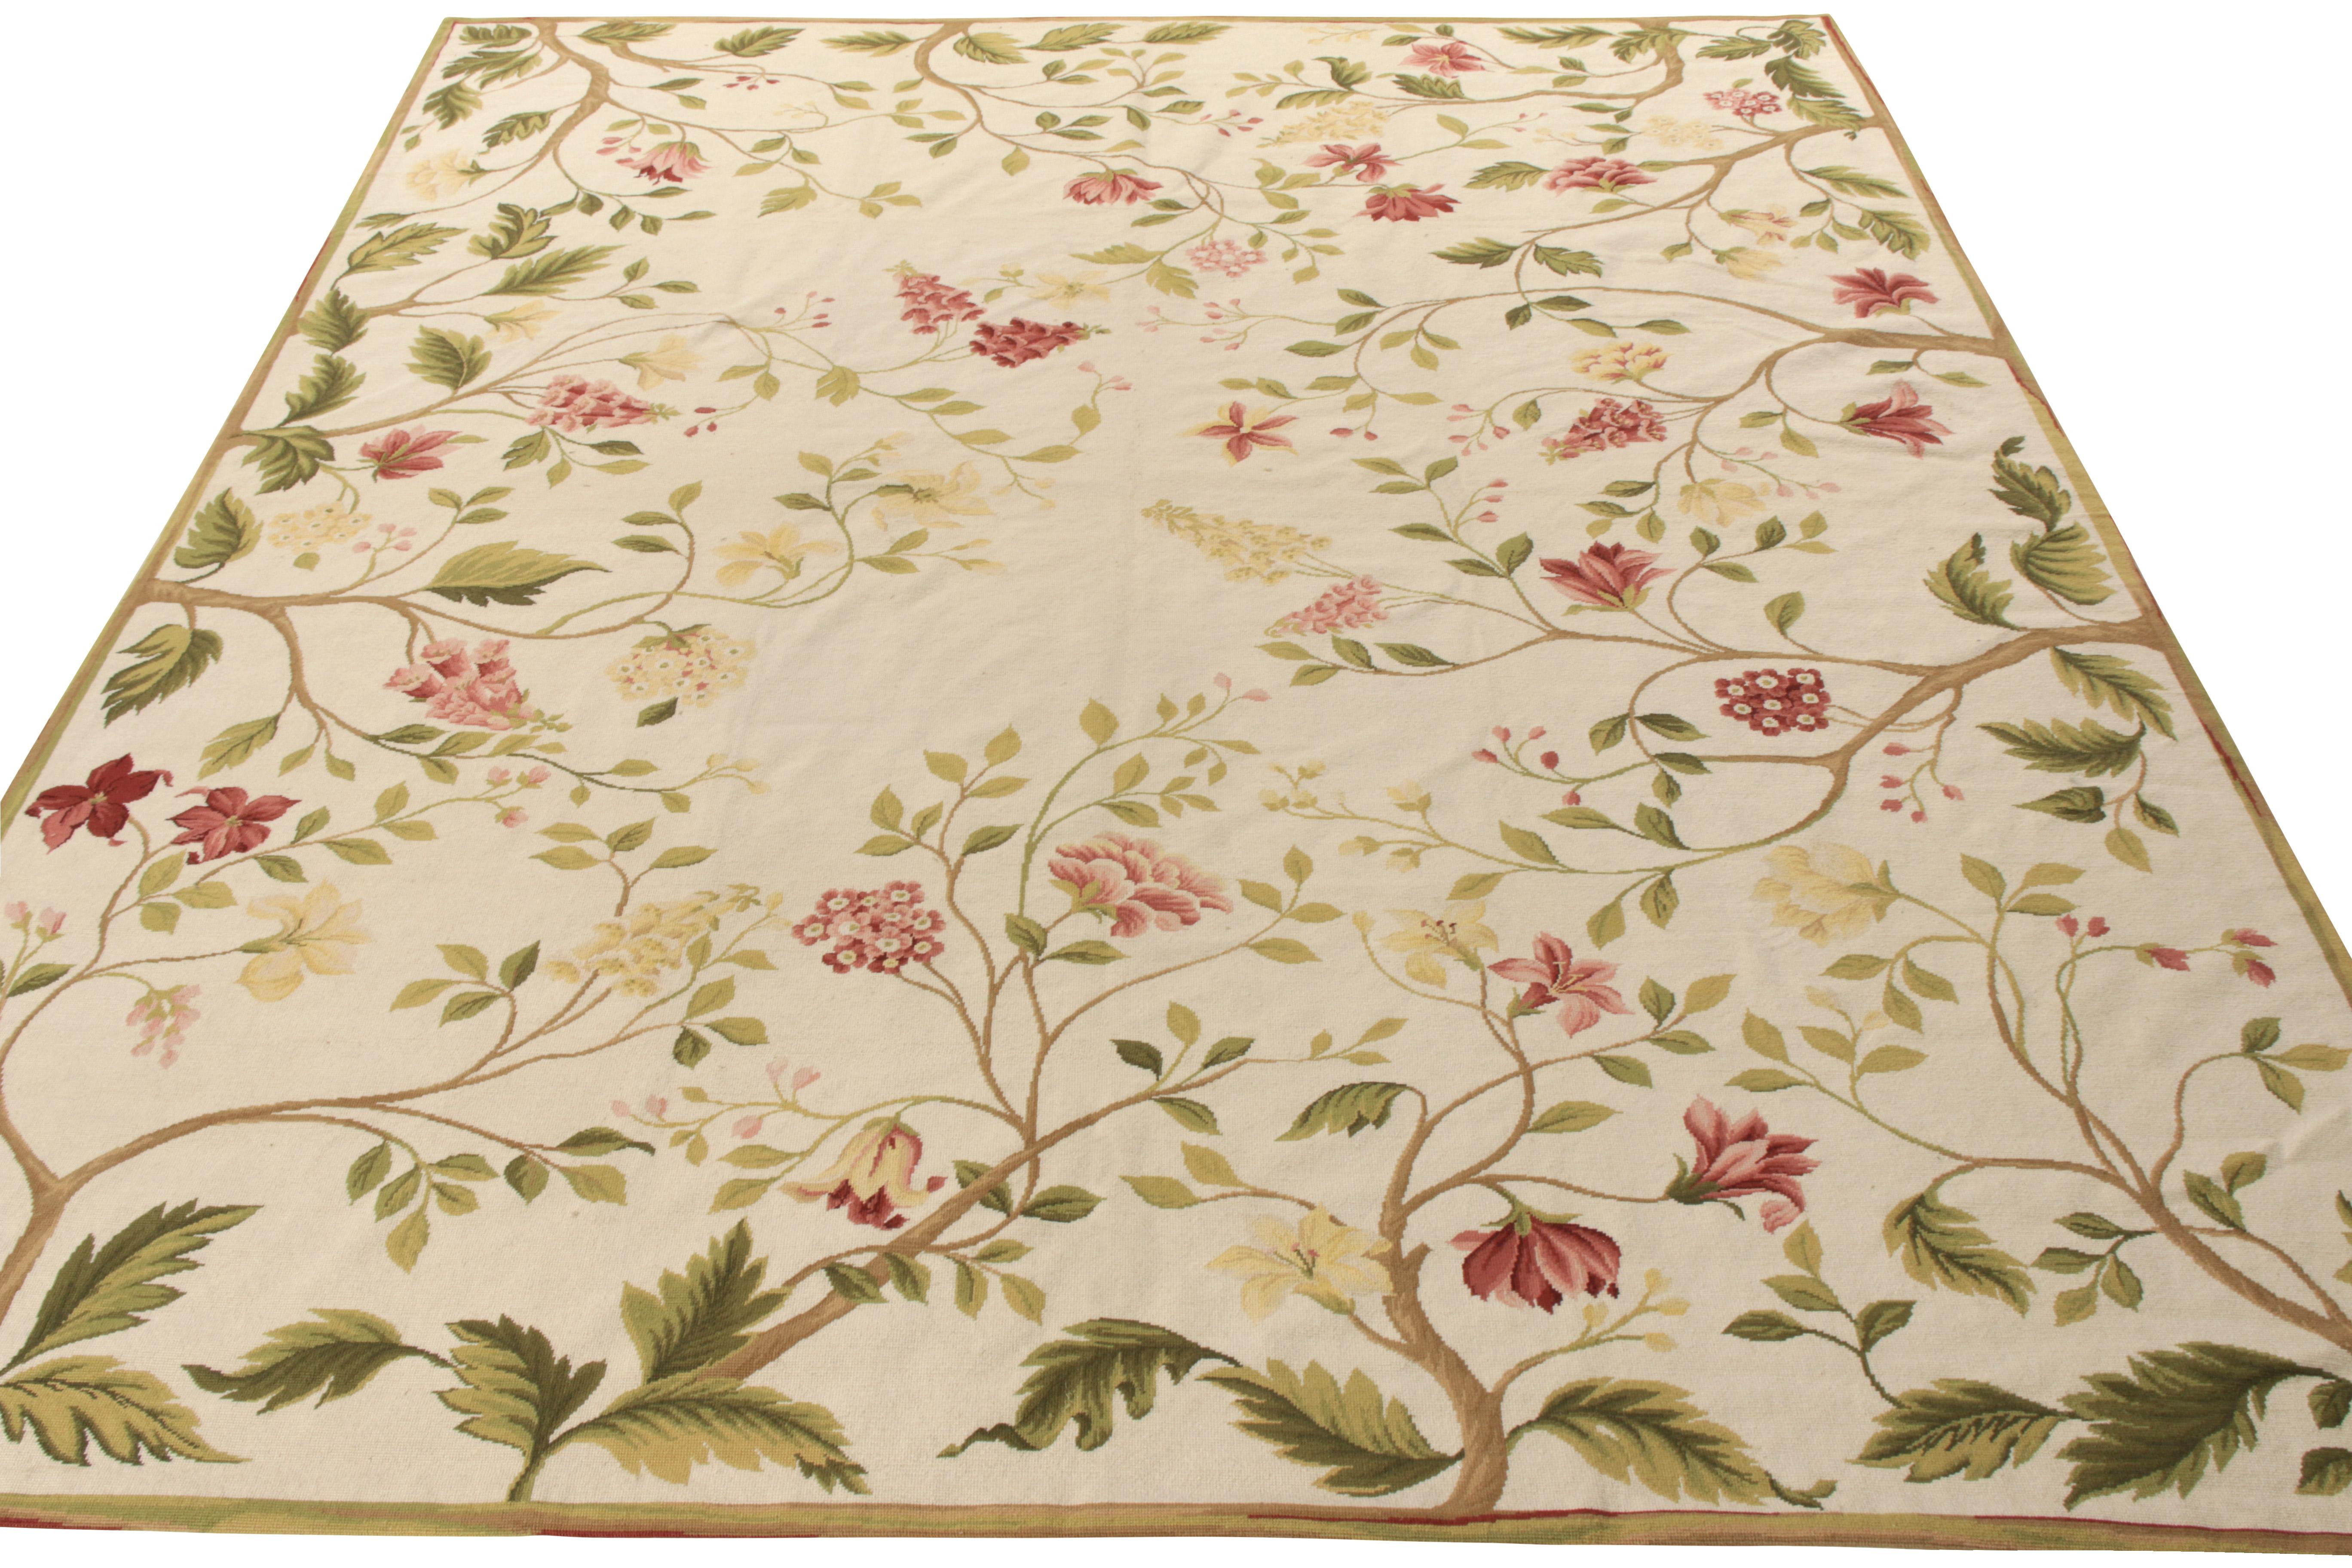 Handmade in wool, a delicious 8x10 needlepoint rug from Rug & Kilim’s coveted European style rug collection. This transitional rug enjoys an awe inspiring floral pattern in beige-brown against a cream background, with tasteful notes of pink and